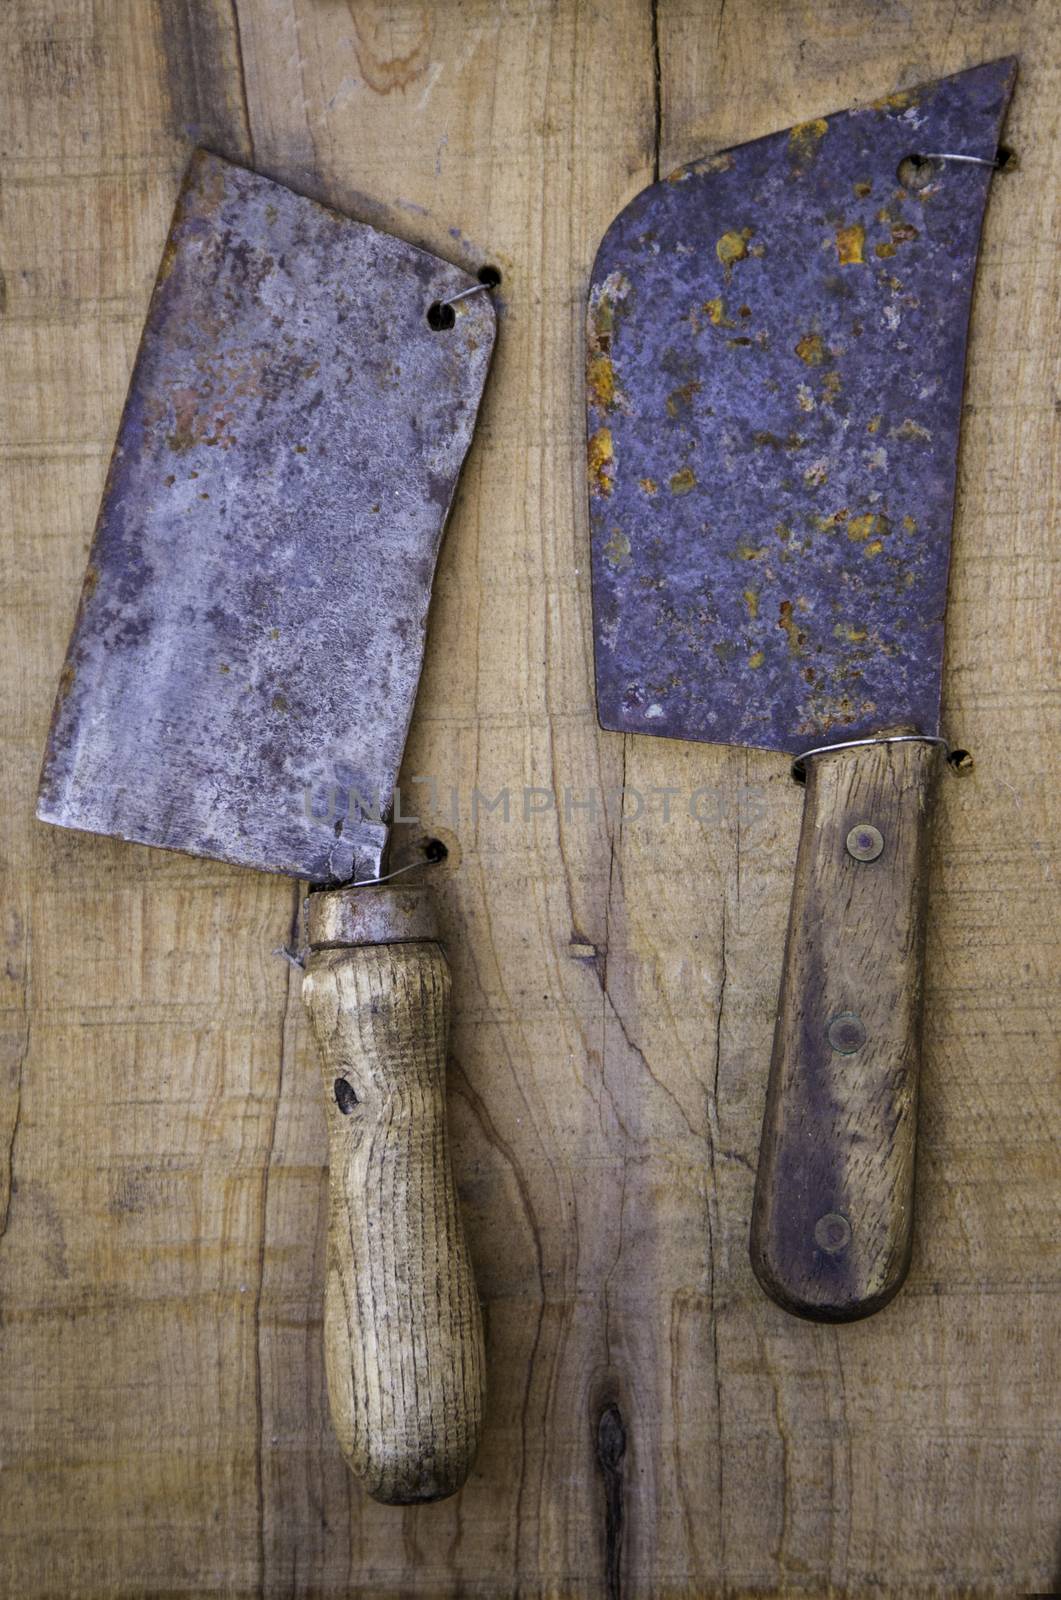 Antique kitchen knives, detail of objects to cut